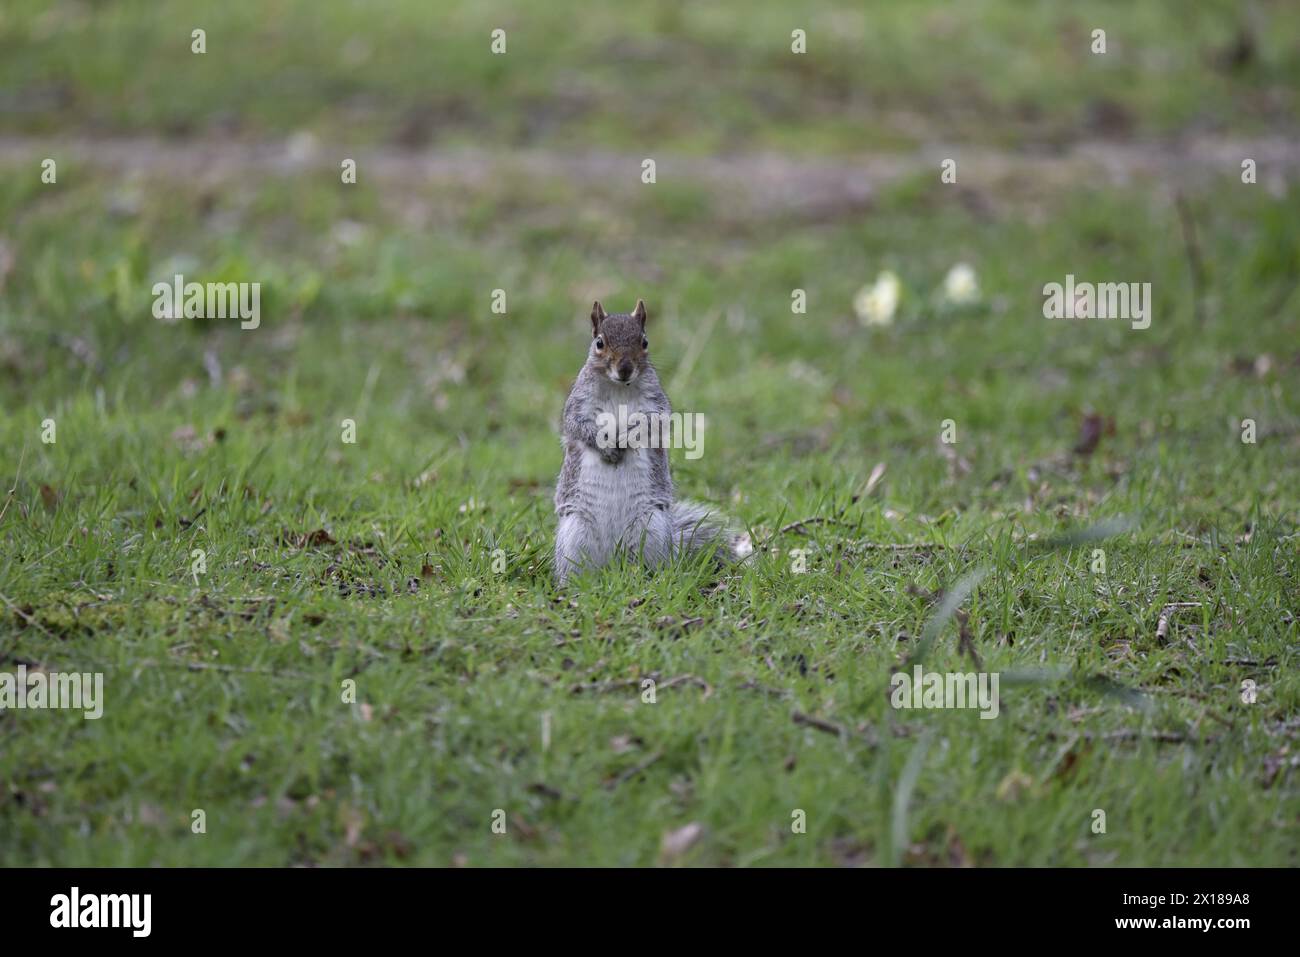 Eastern Gray Squirrel (Sciurus carolinensis) Sat Facing Camera on Grass, Looking at Camera with Two Front Paws Together on Chest, taken in the UK Stock Photo